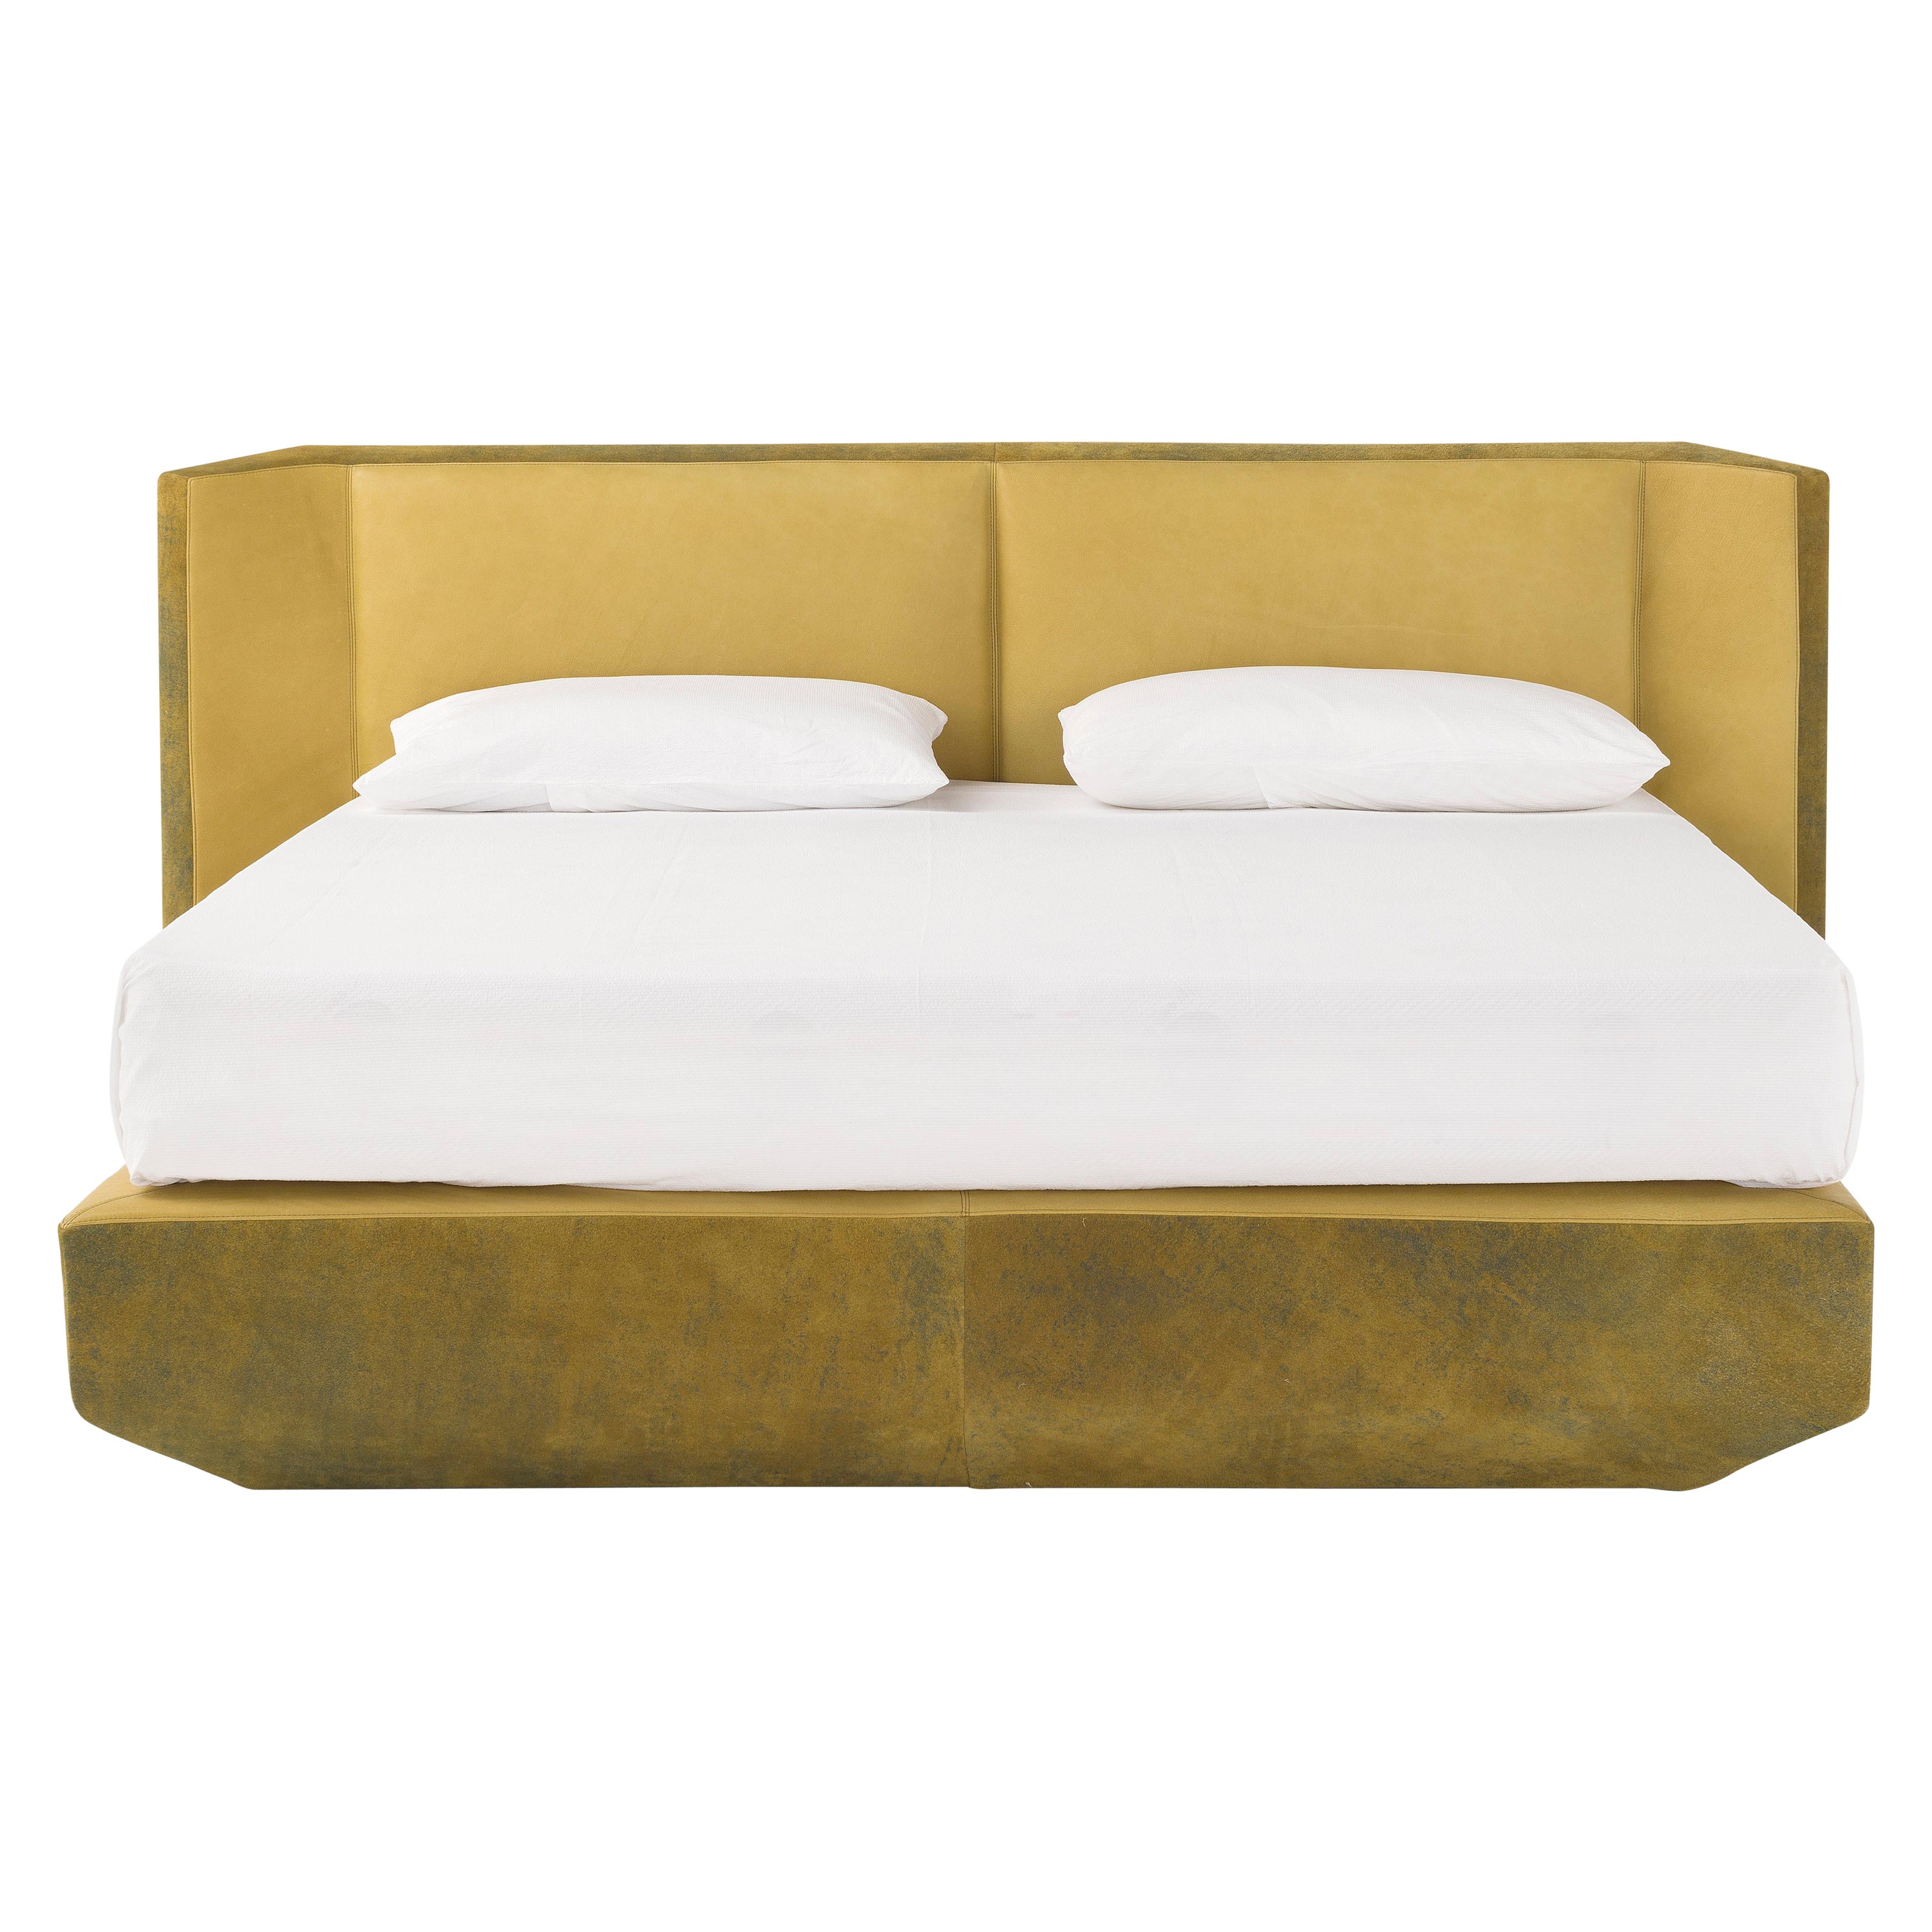 Amura 'Panis' Bed in Yellow Leather by Emanuel Gargano For Sale